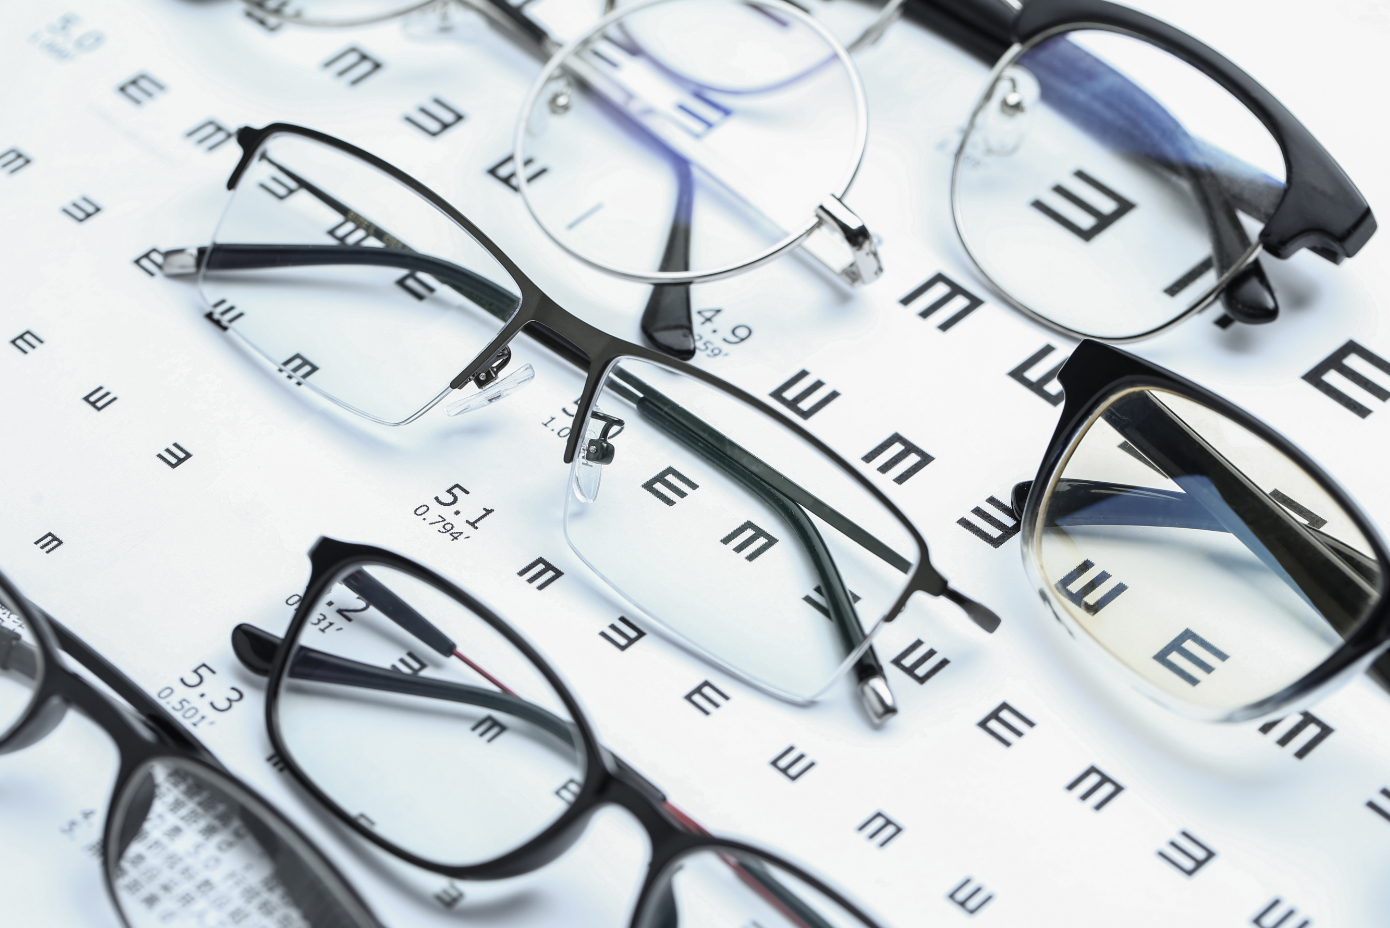 Warby Parker vs. Zenni Optical vs. LensCrafters vs. EyeBuyDirect: Which is Best for Prescription Glasses?